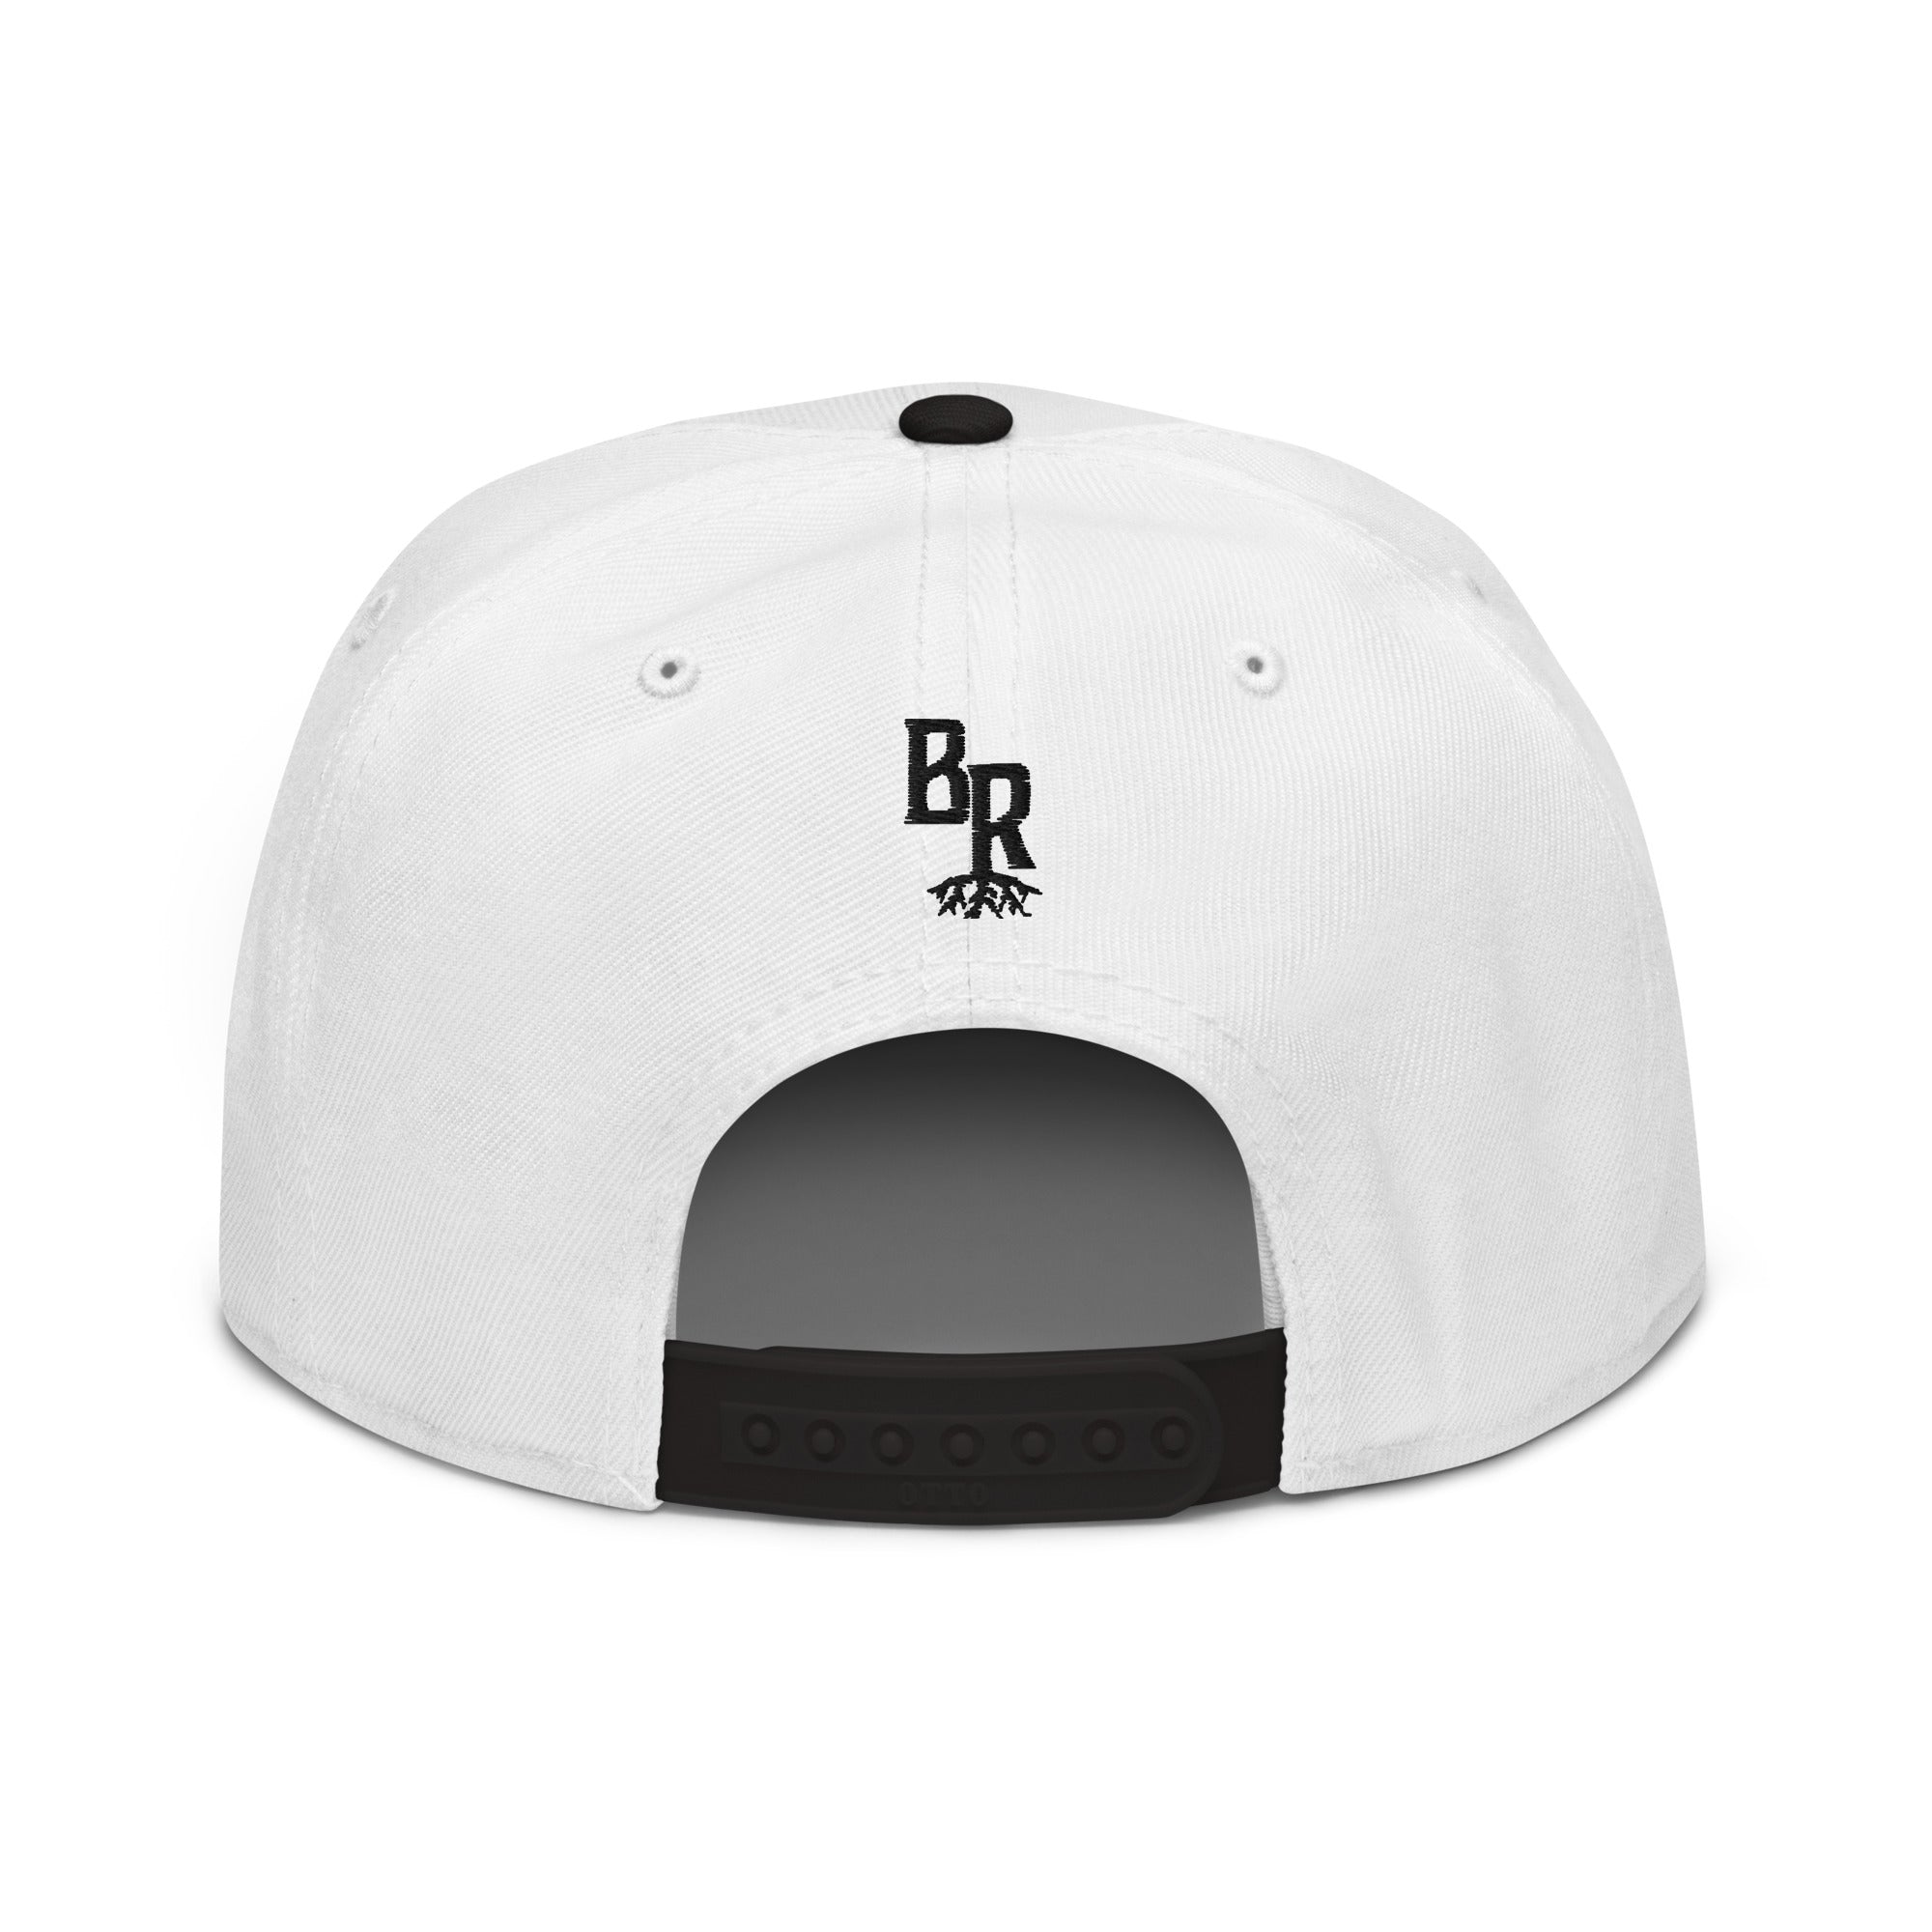 Bold Snapback Hat (Puff Embroidery)